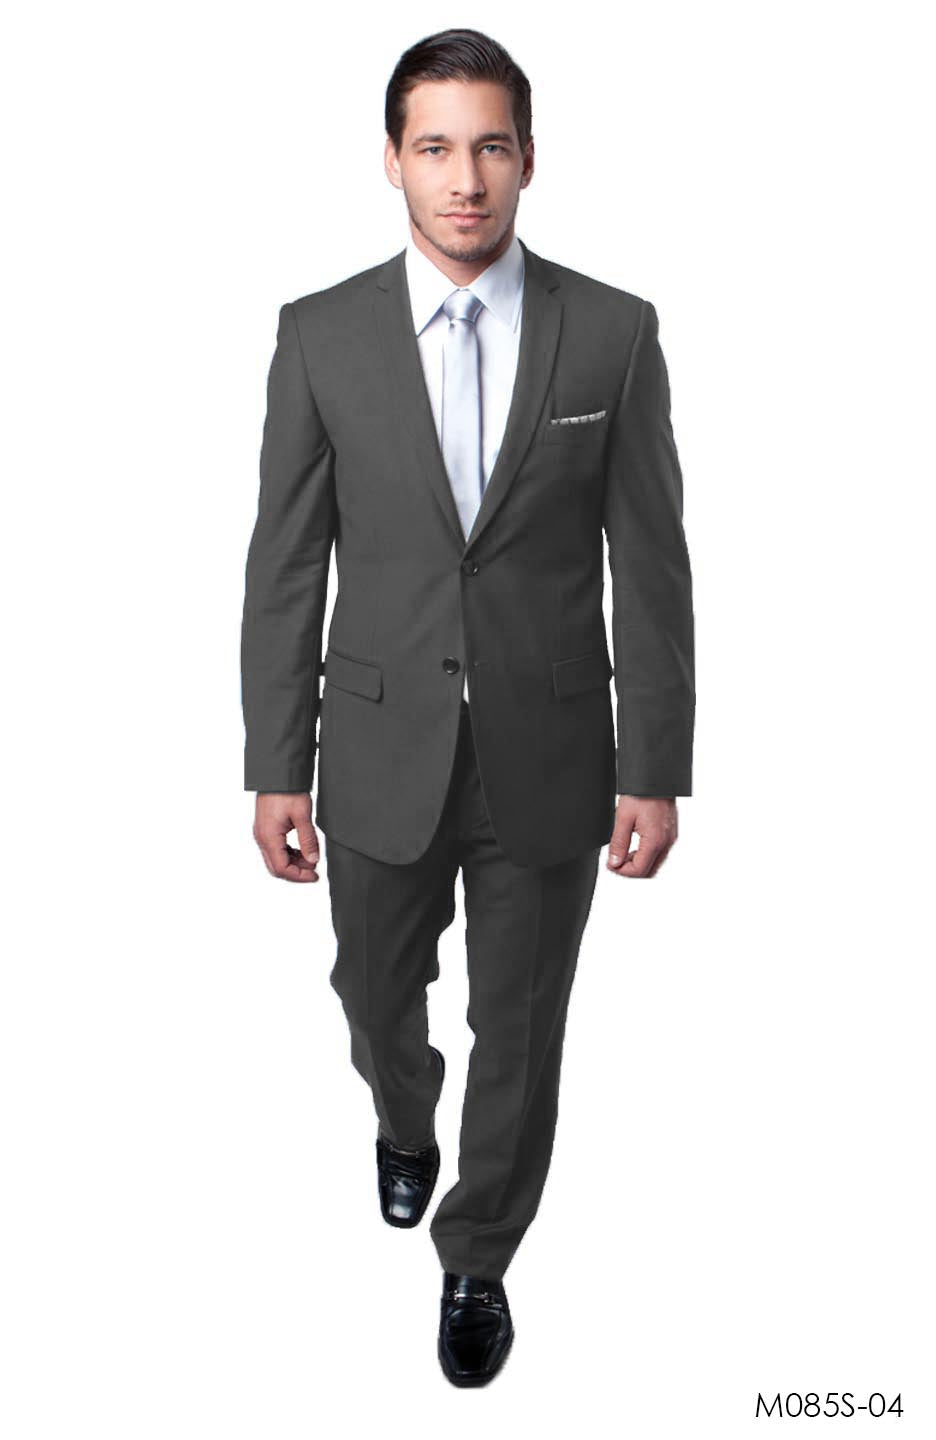 Grey Suit For Men Formal Suits For All Ocassions M085S-04